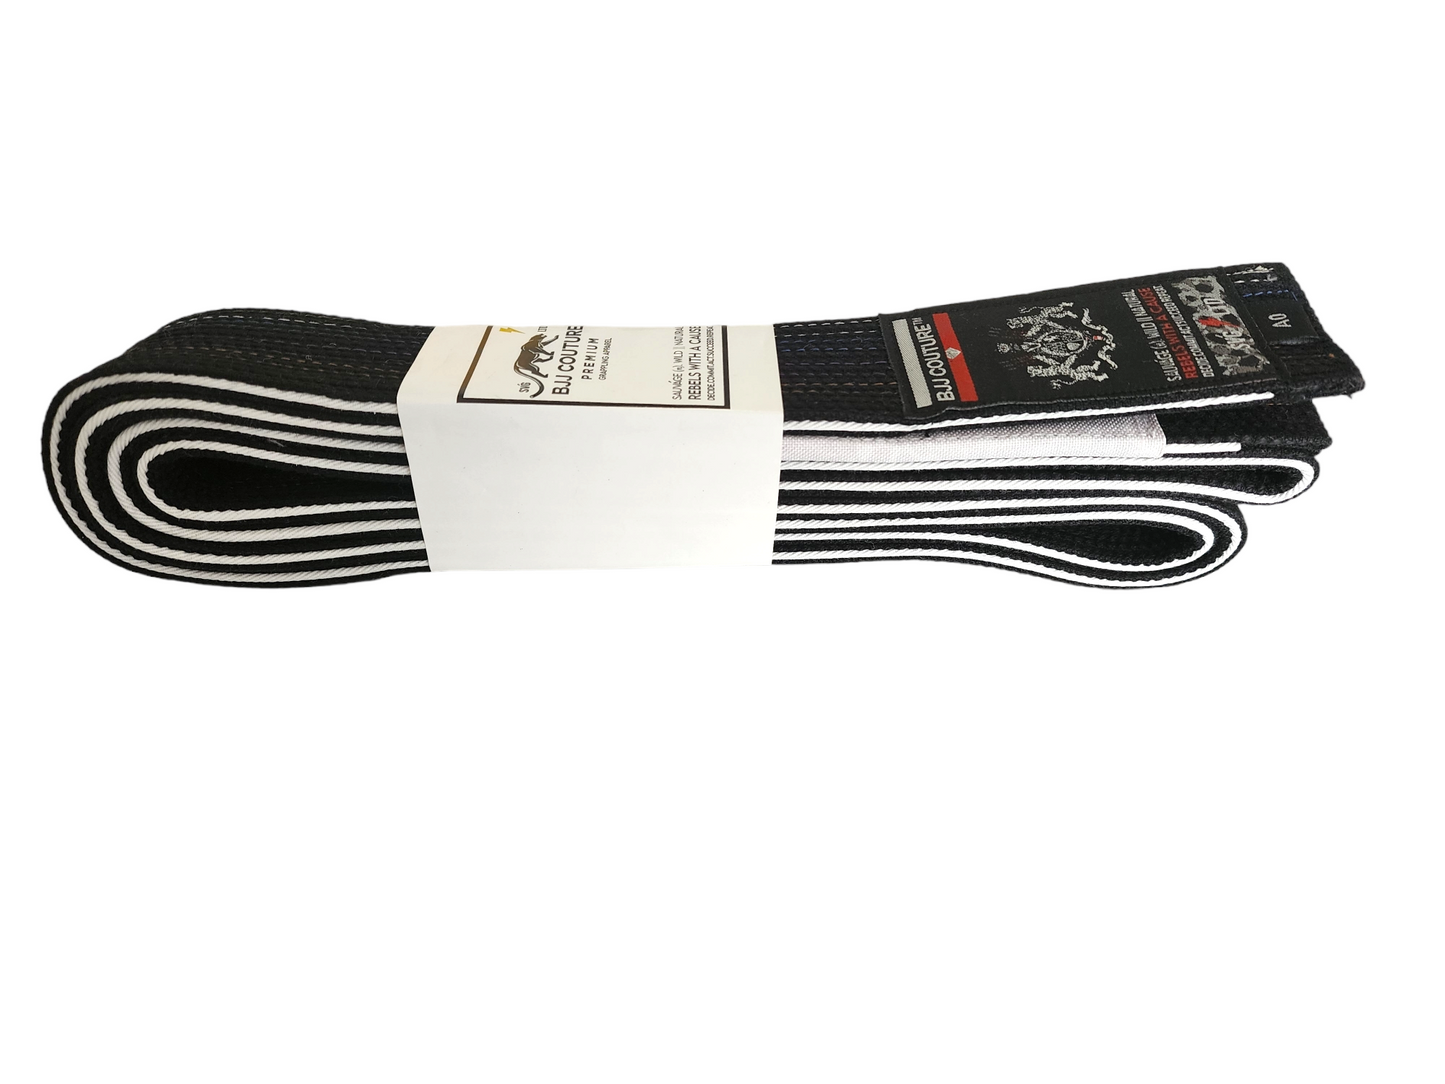 BJJ Couture Black Belt with Contrast Stitching and White Piping - Competitor Series - Xiketic